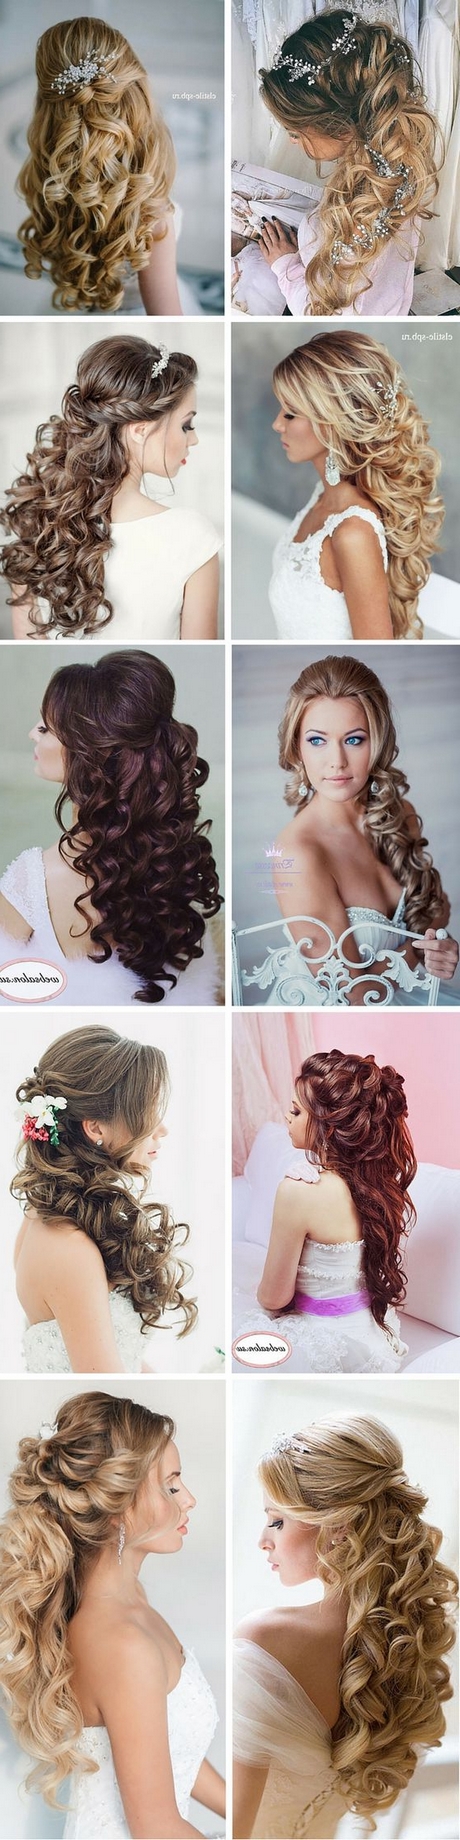 hairstyle-for-bride-2021-45_16 Hairstyle for bride 2021